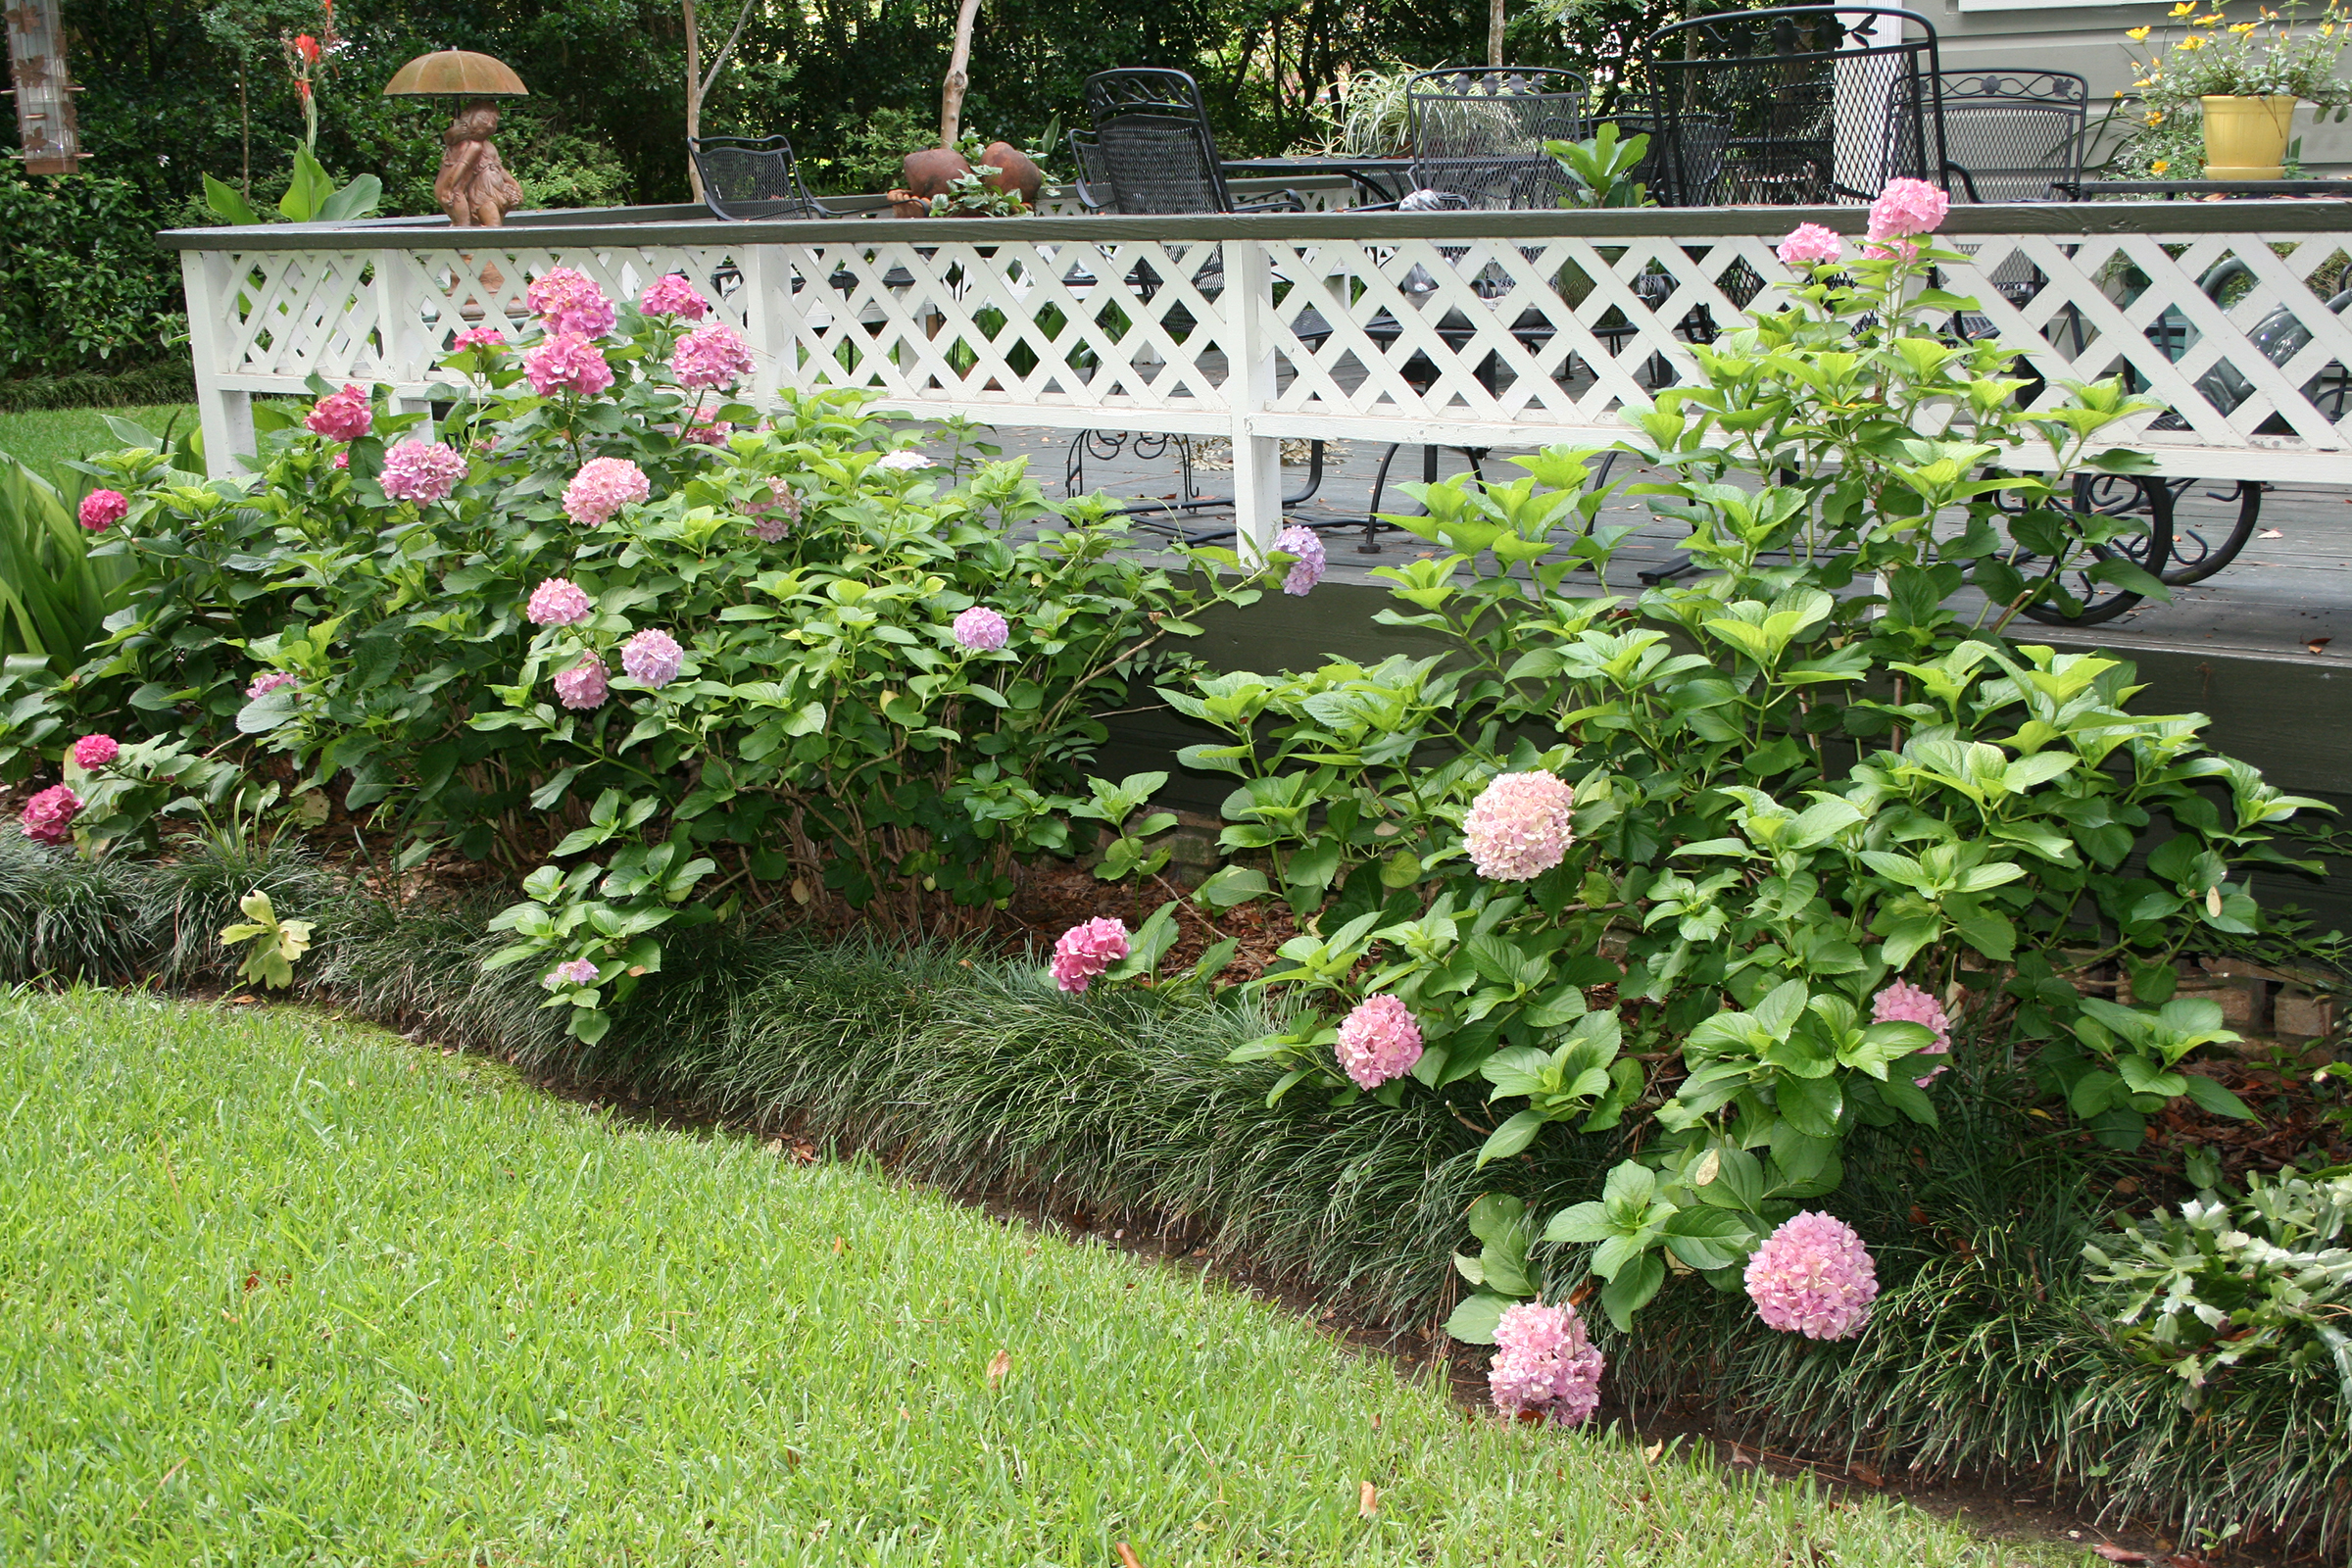 Example of a raised landscape bed that uses liriope as the border.